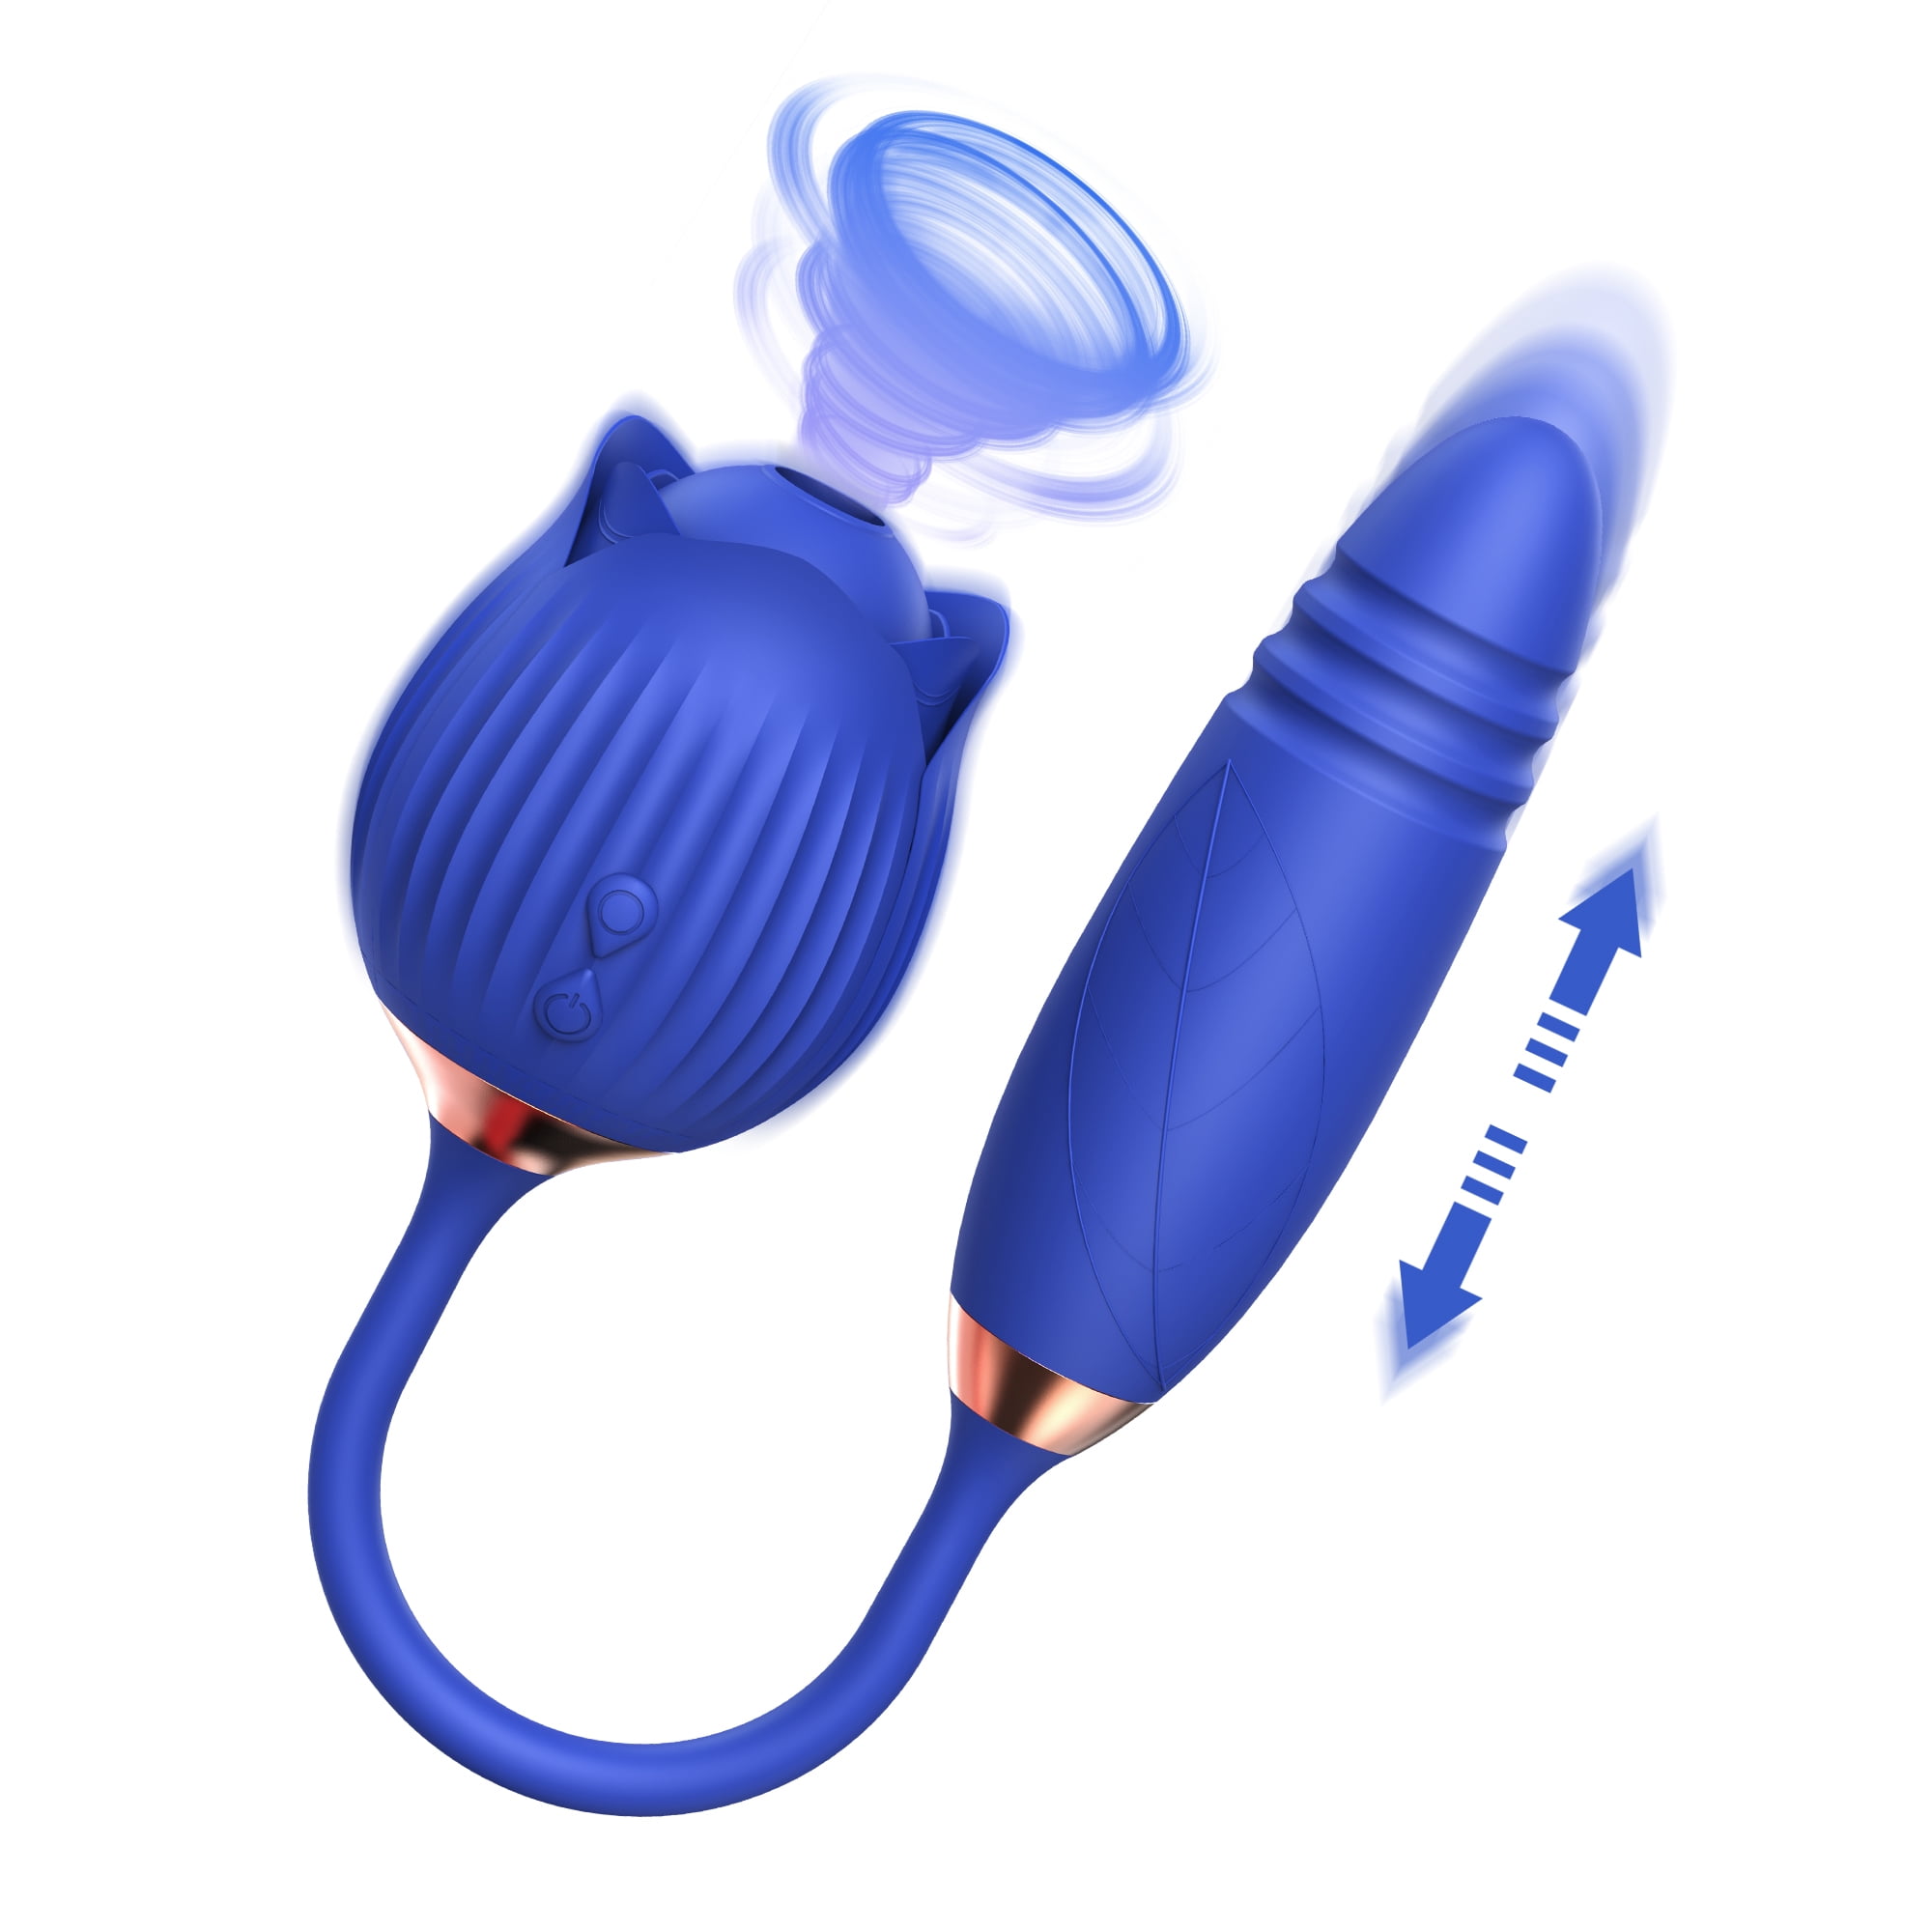 DARZU Rose Adult Sex Toys - Vibrator G Spot Stimulator with Thrusting Dildo for Woman Couples - Blue